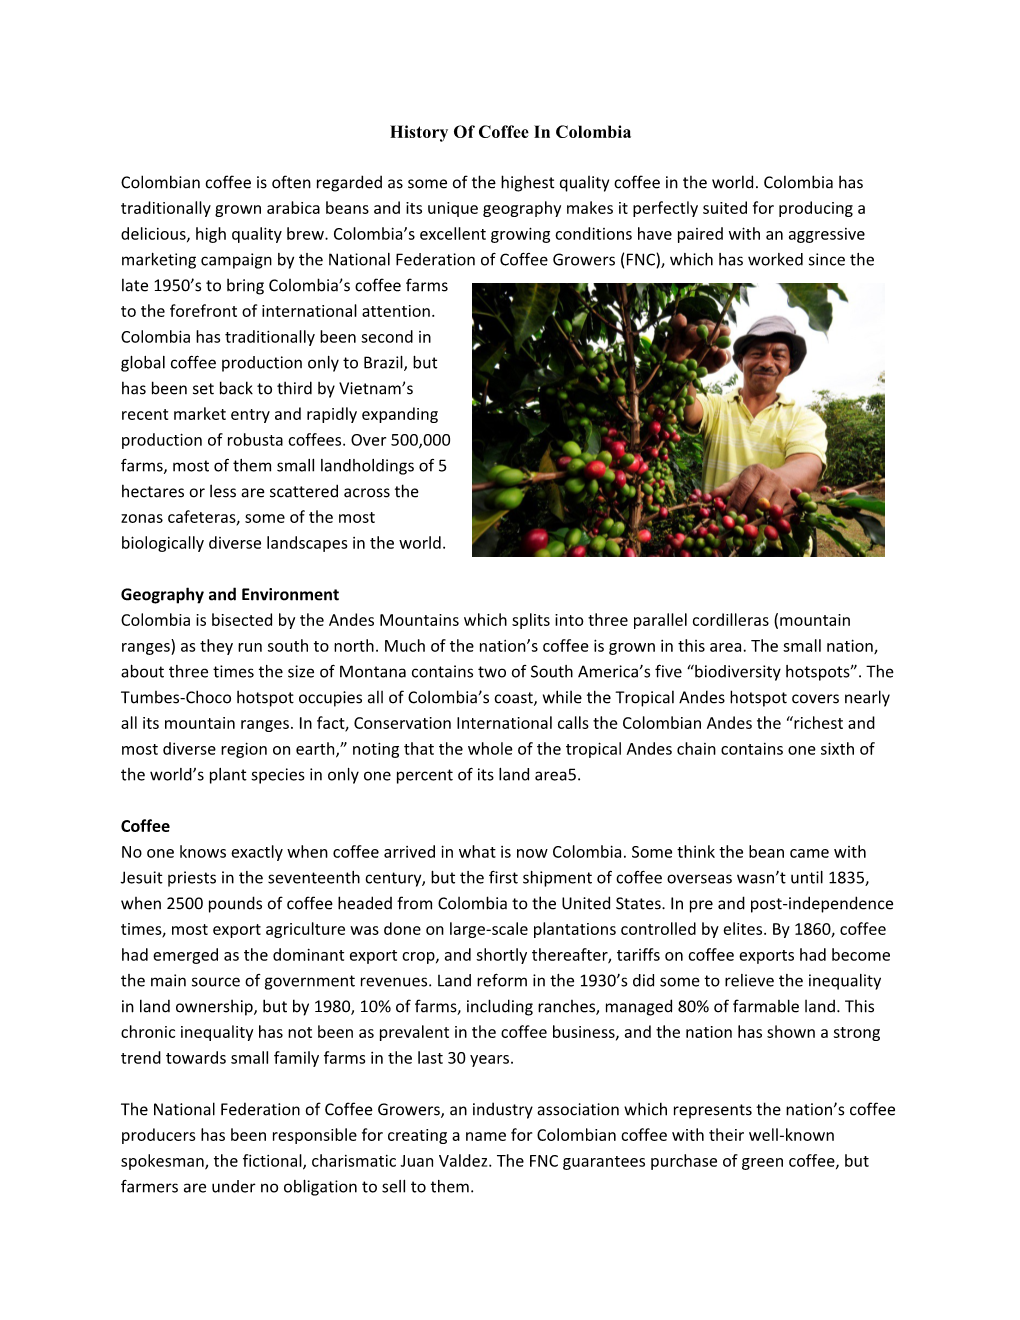 History of Coffee in Colombia